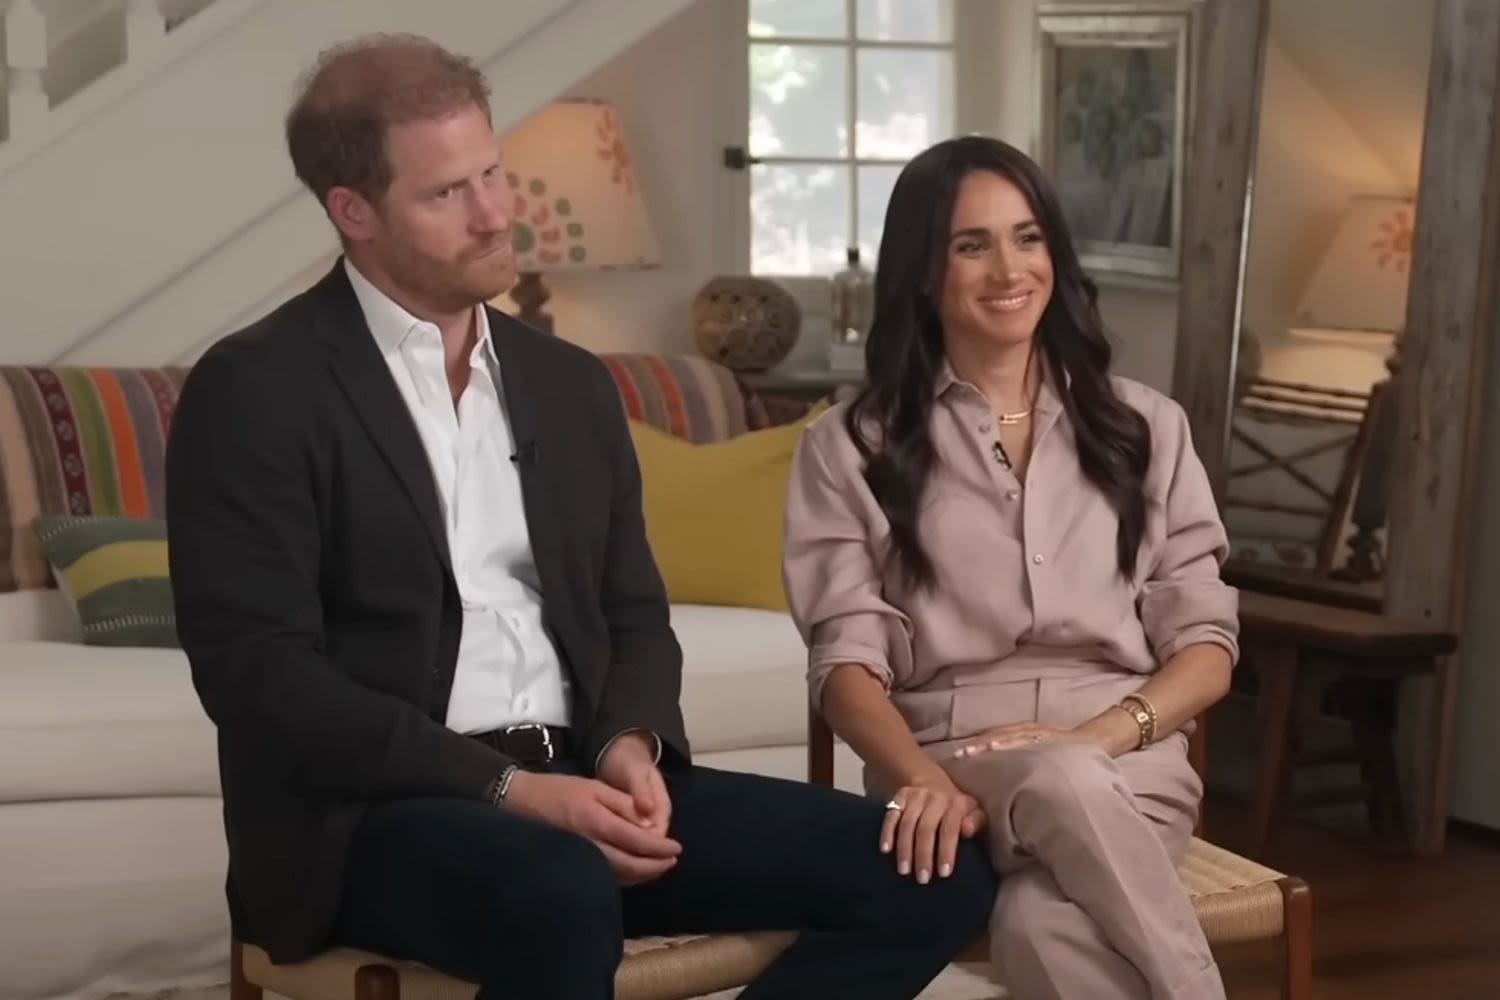 Meghan Markle's Heartfelt Gesture in Emotional Interview with Prince Harry